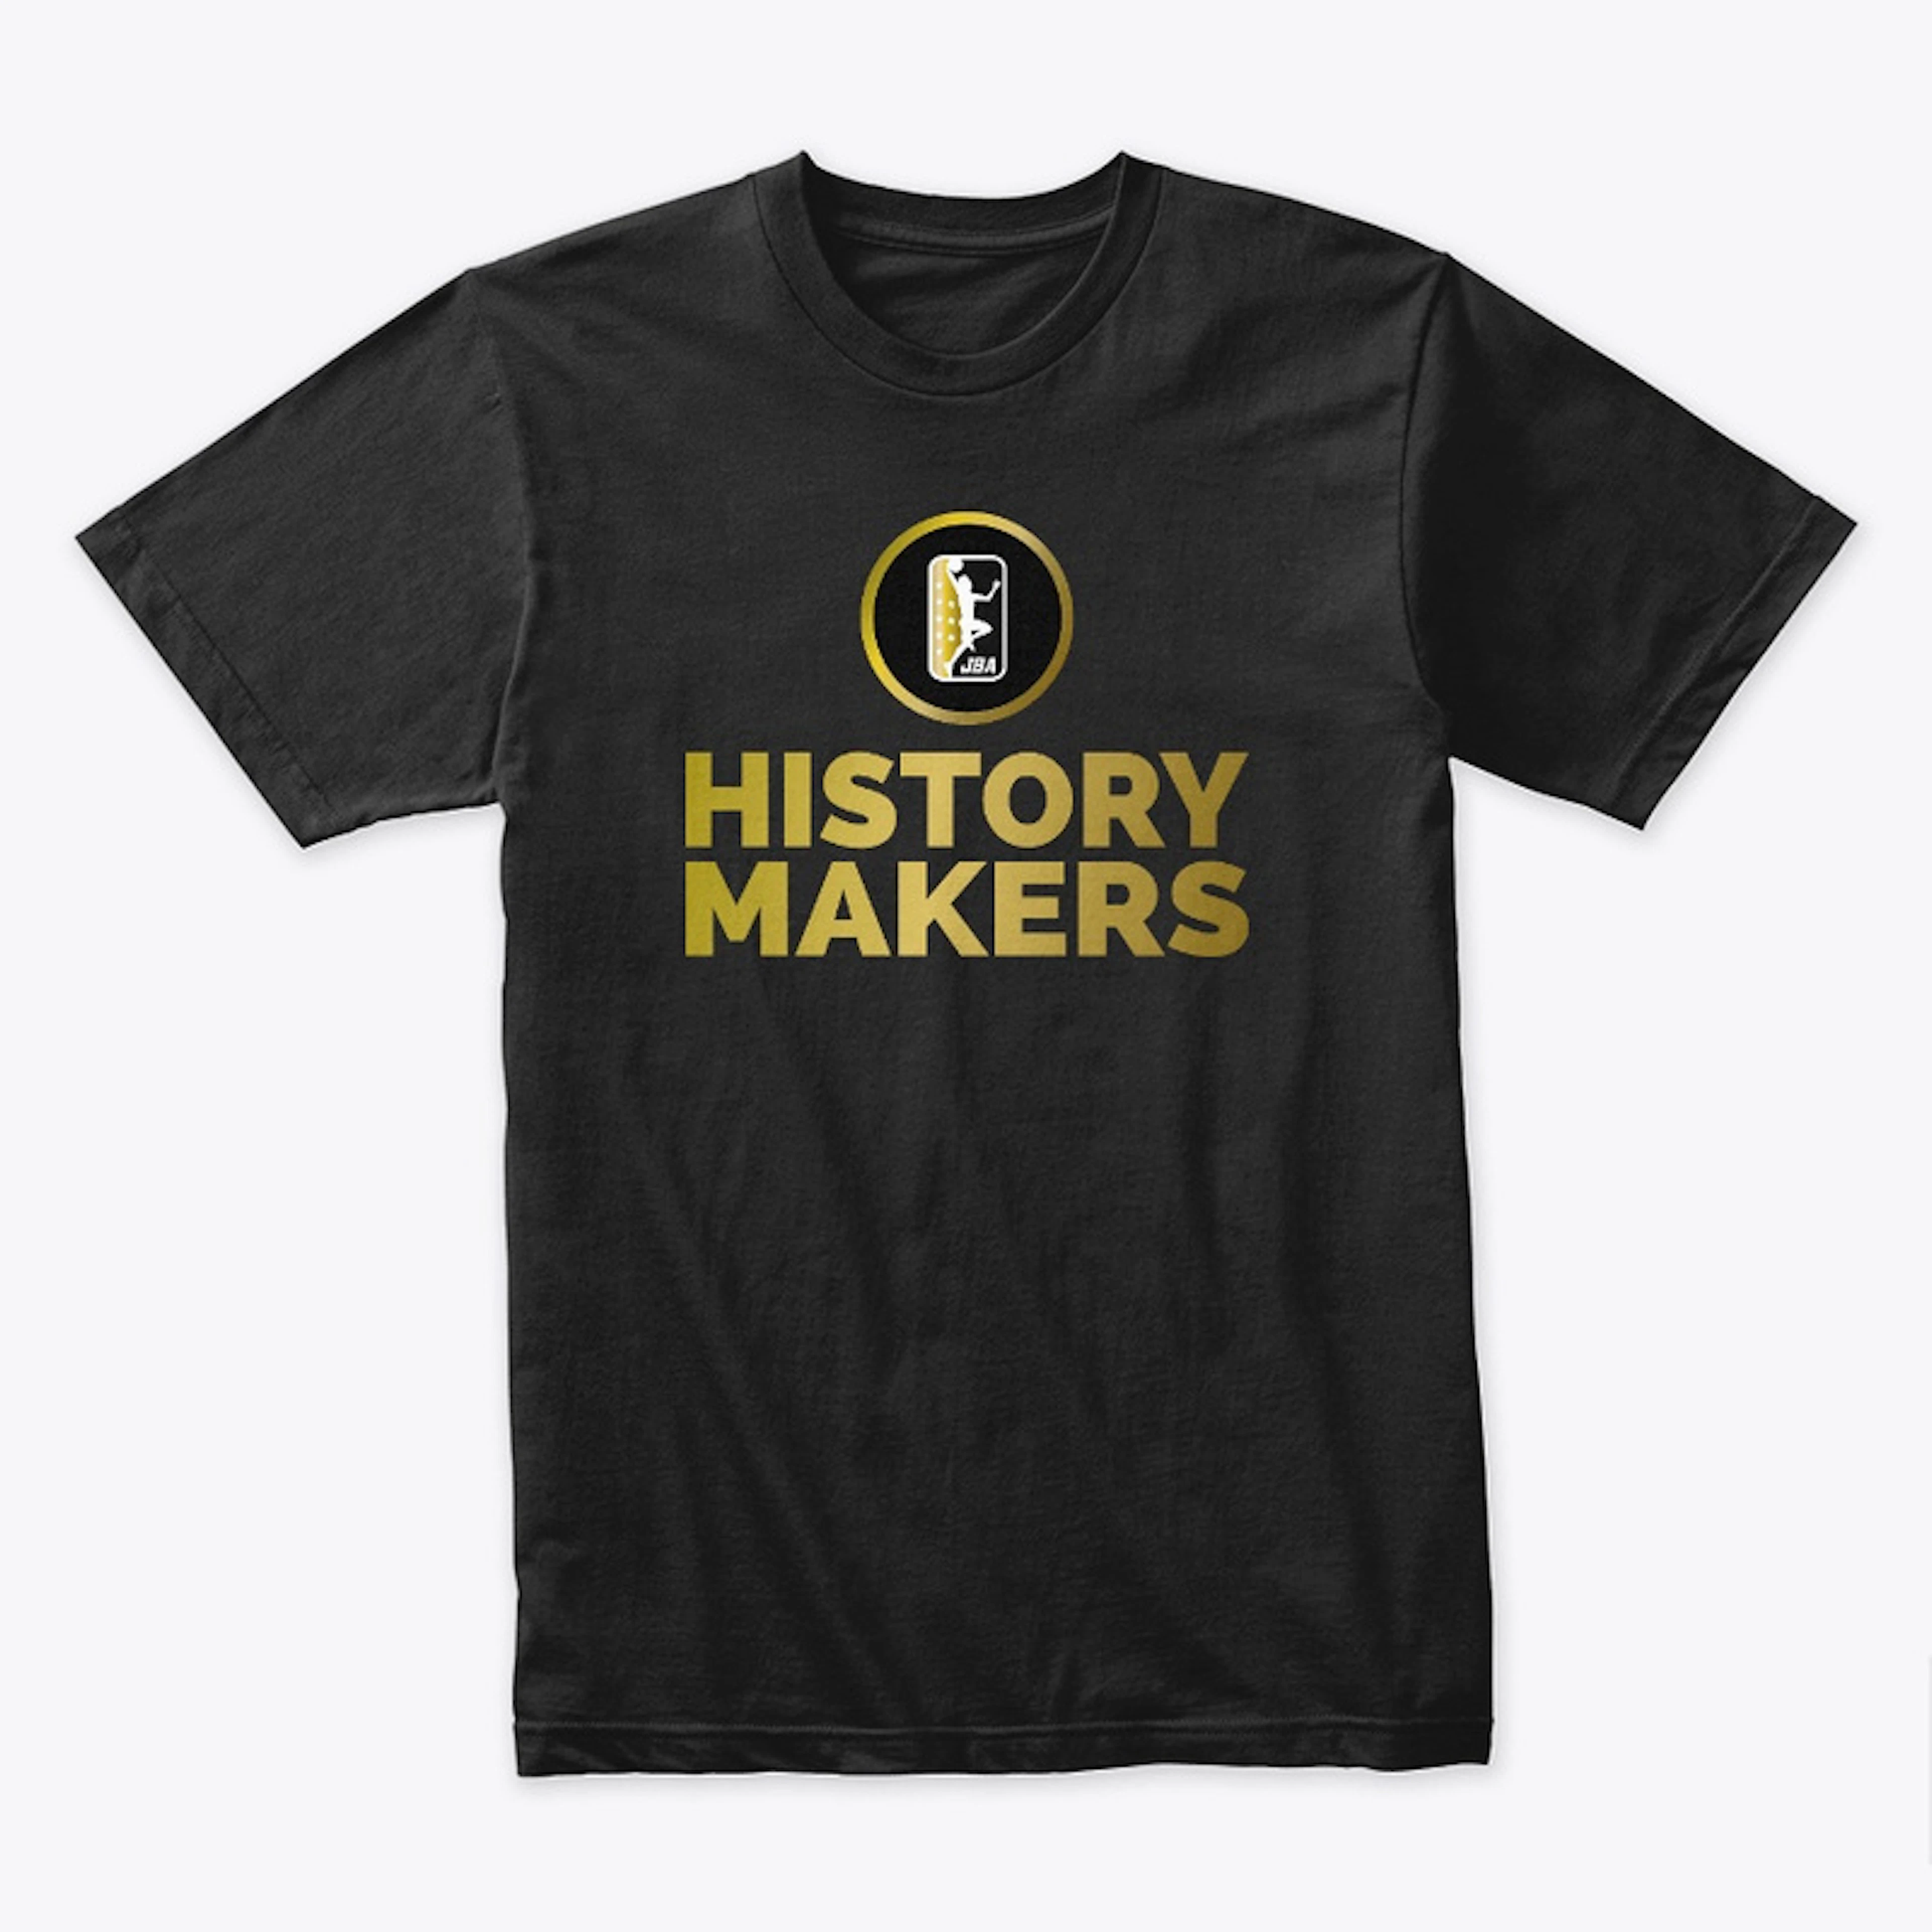 HISTORY MAKERS TEE!